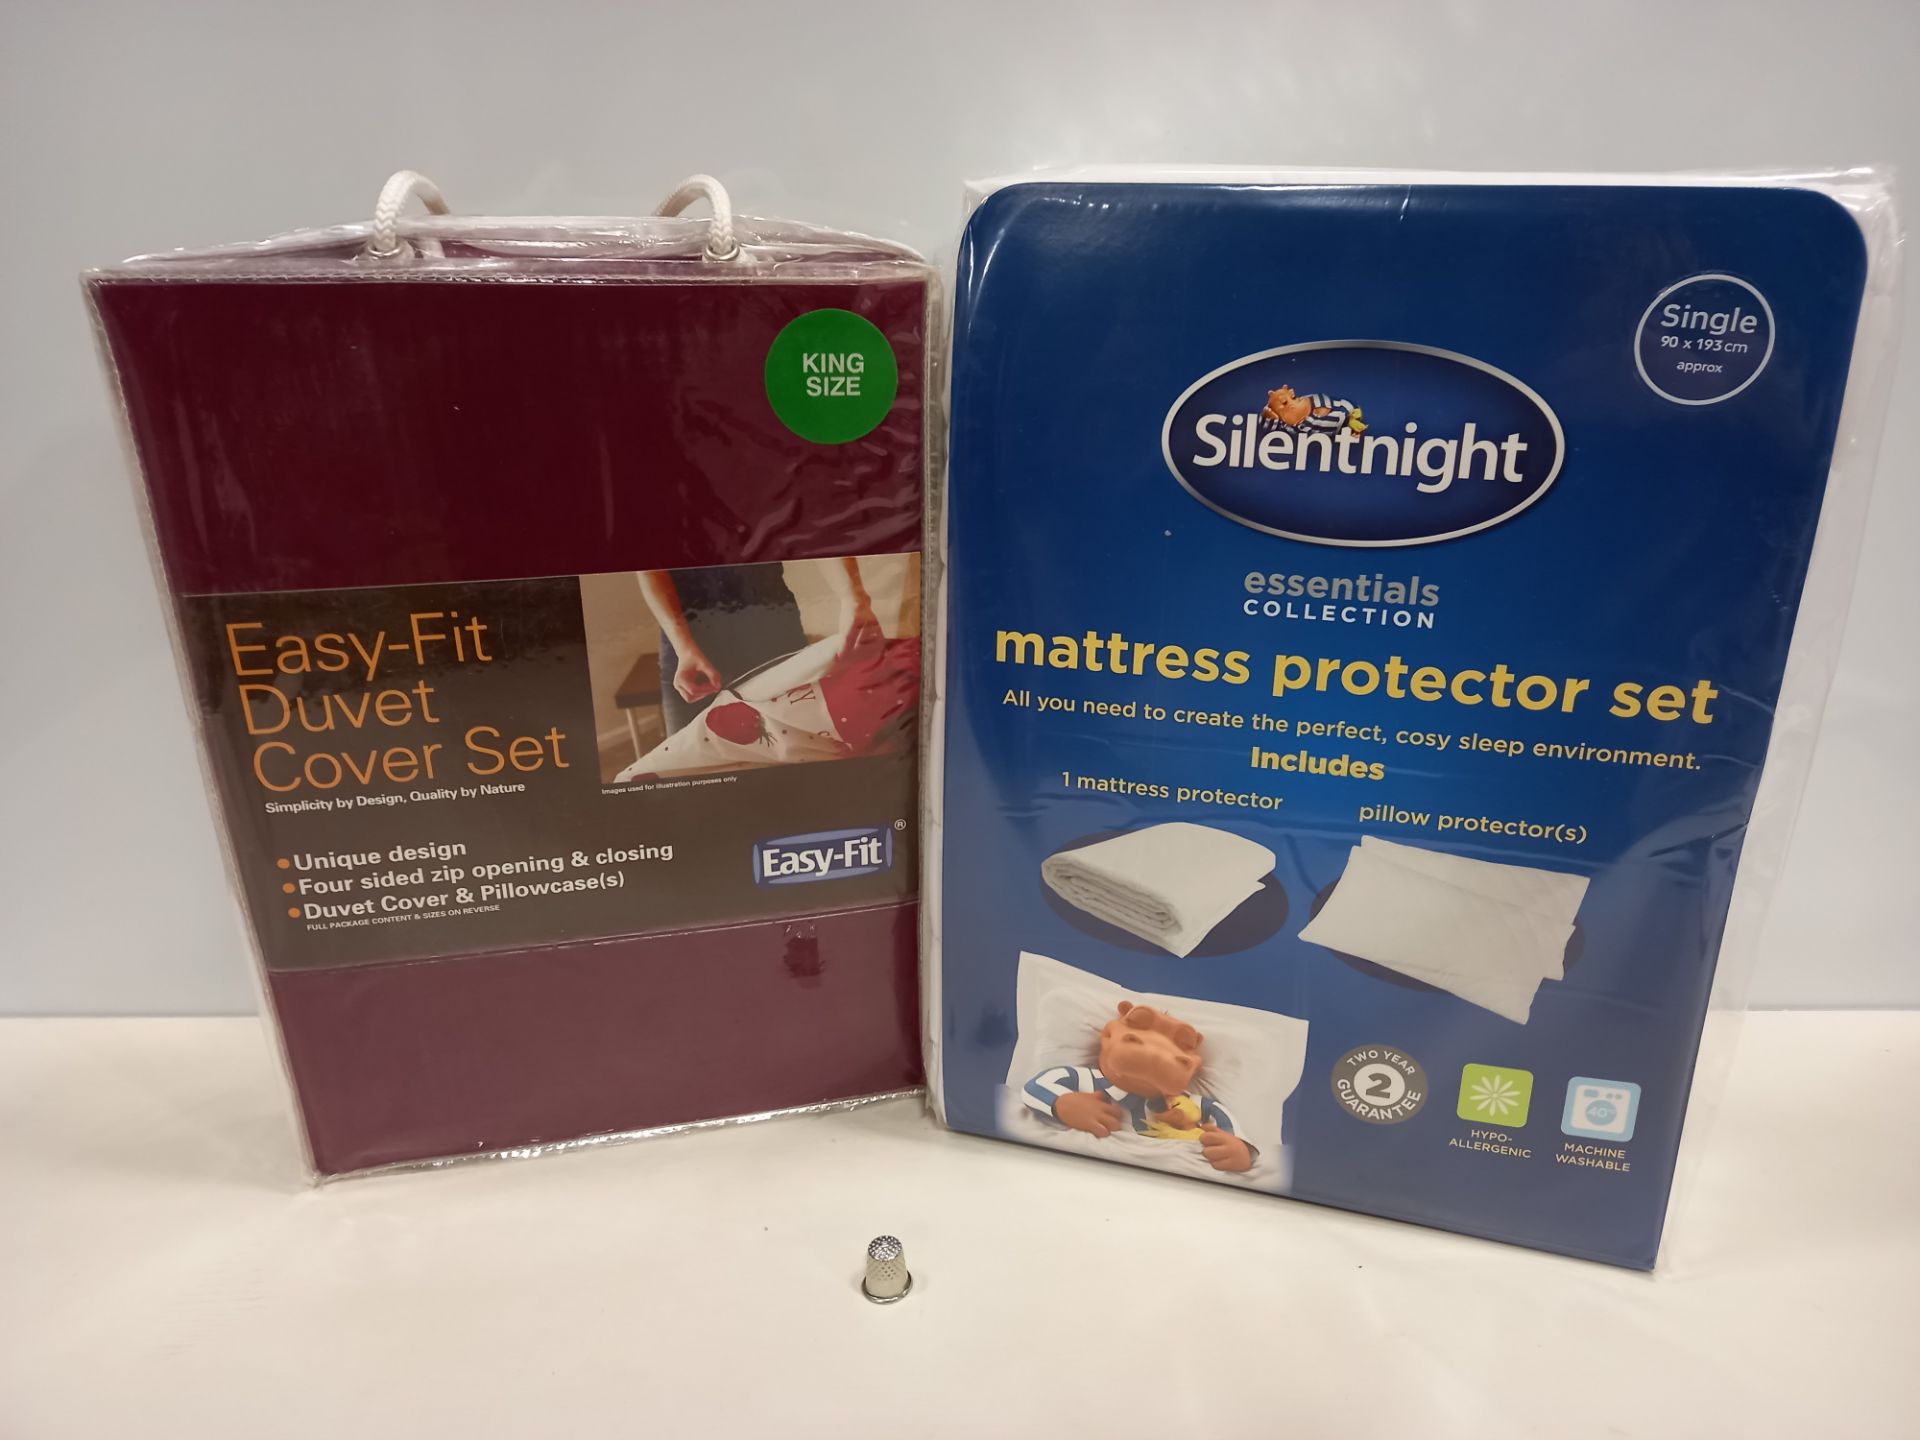 18 X BRAND NEW SILENT NIGHT MATTRESS PROTECTOR SET, KING SIZE AND SINGLE EASY FIT DUVET COVER SETS